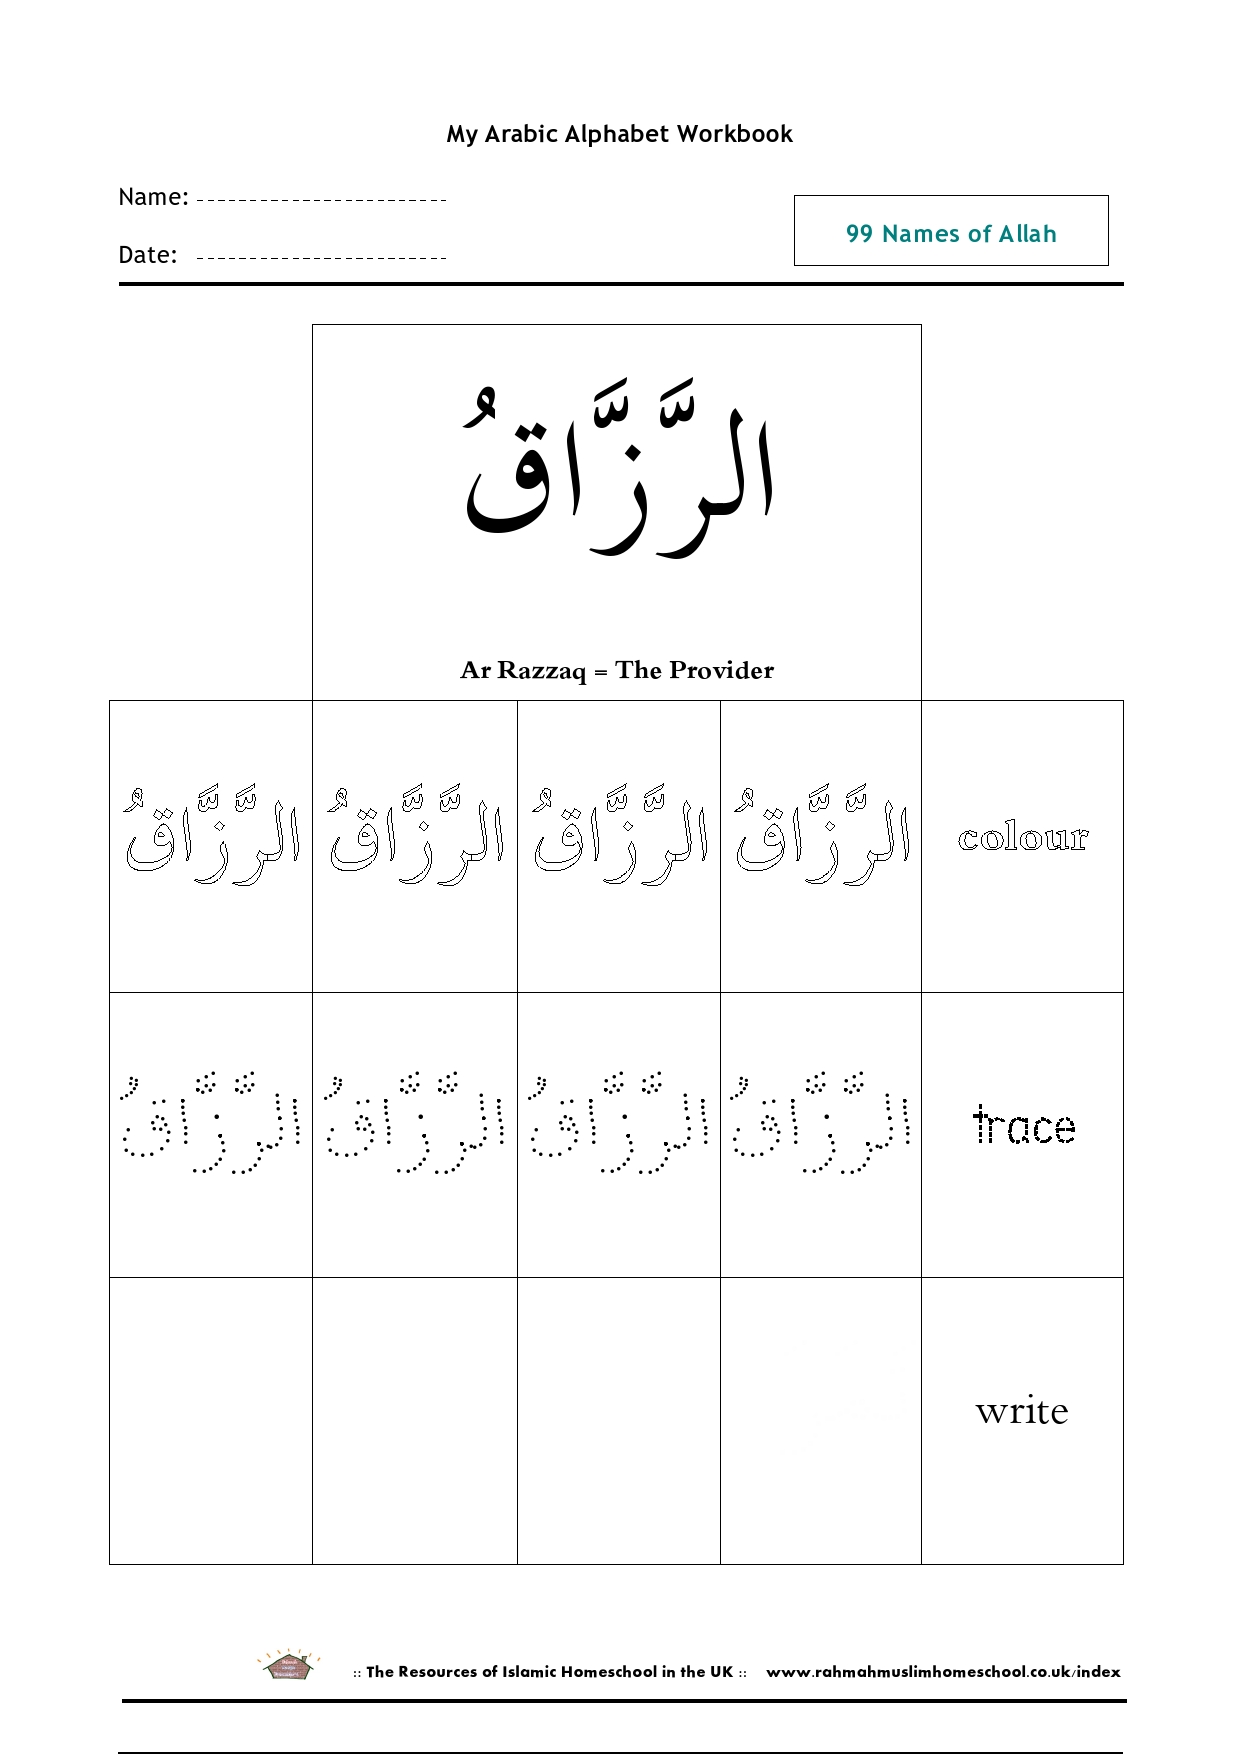 What Are The 99 Names Of Allah Called